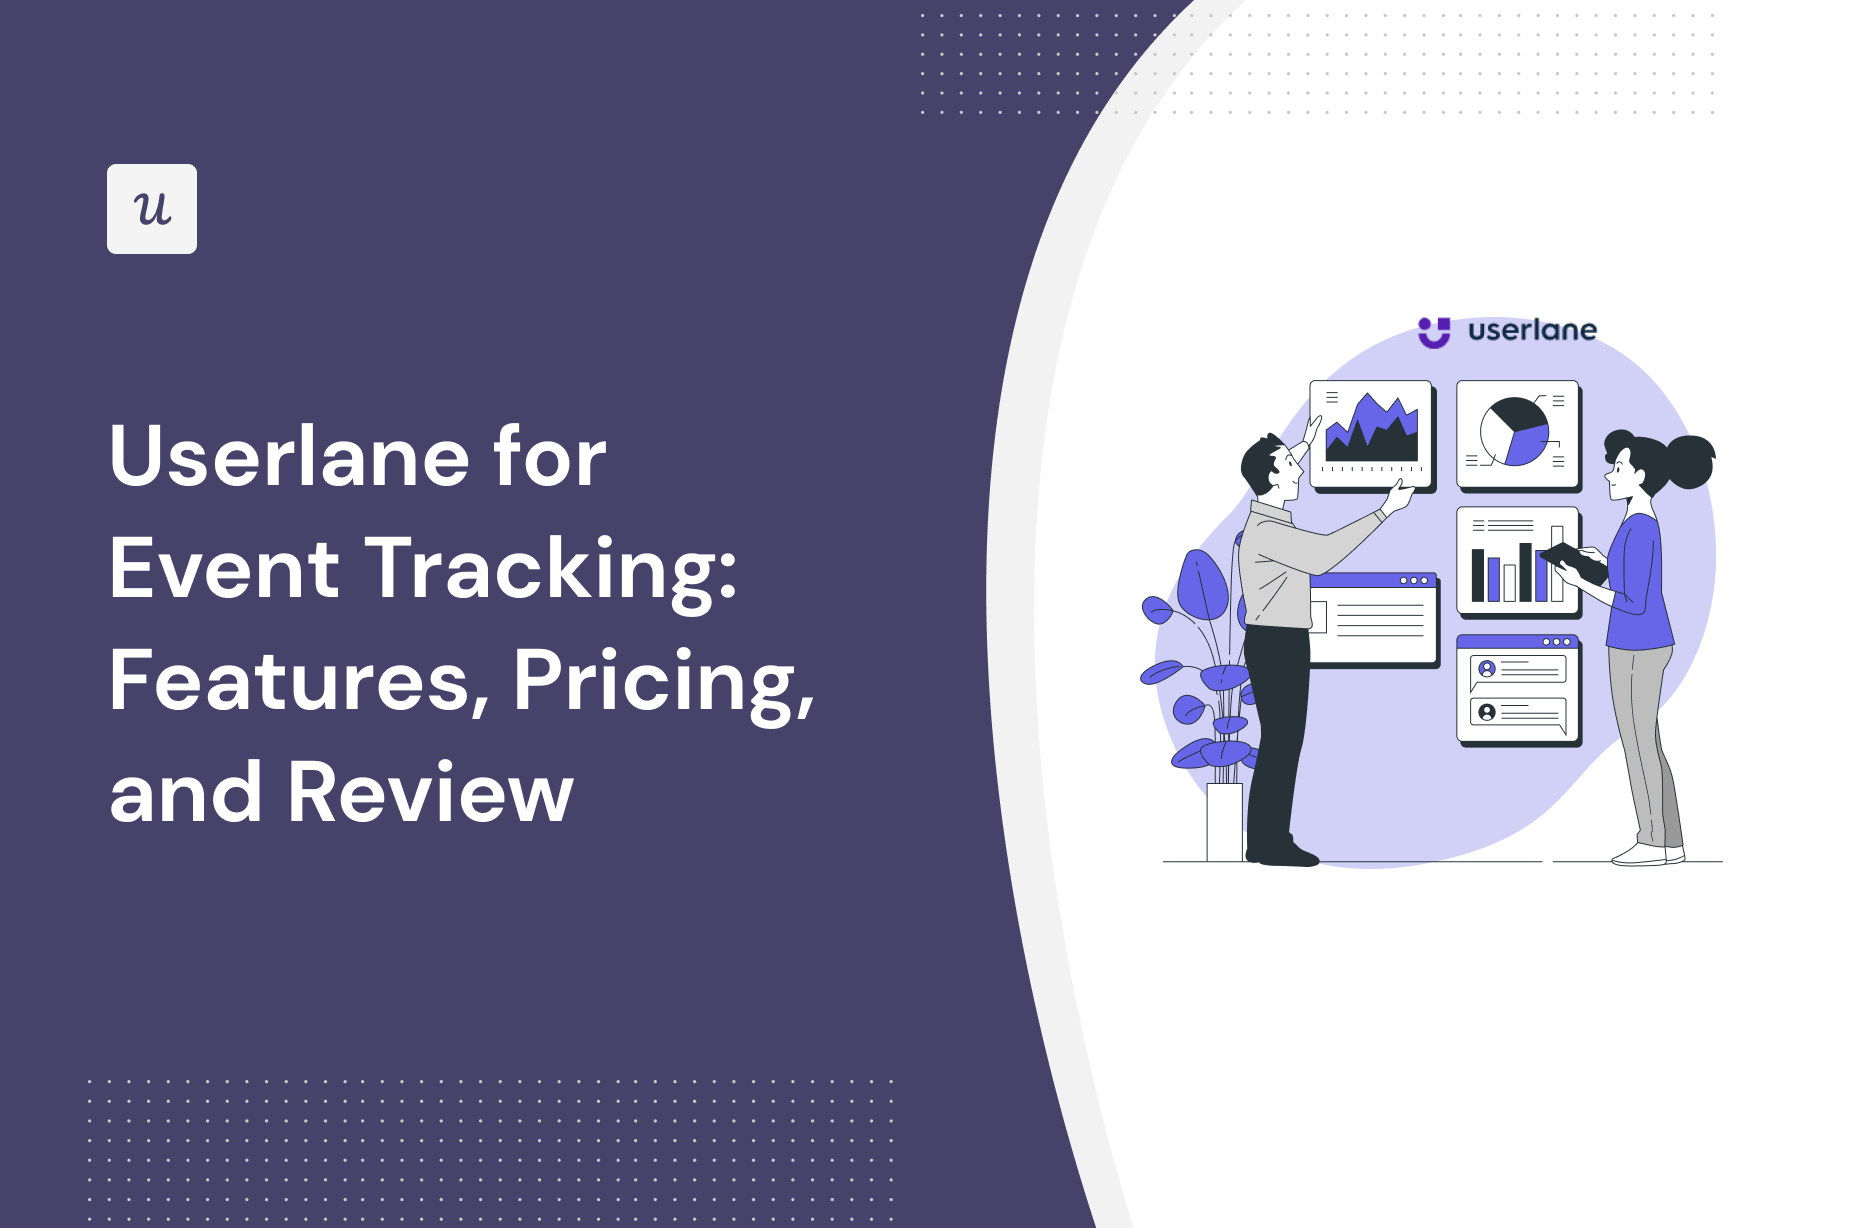 Userlane for Event Tracking: Features, Pricing, and Review